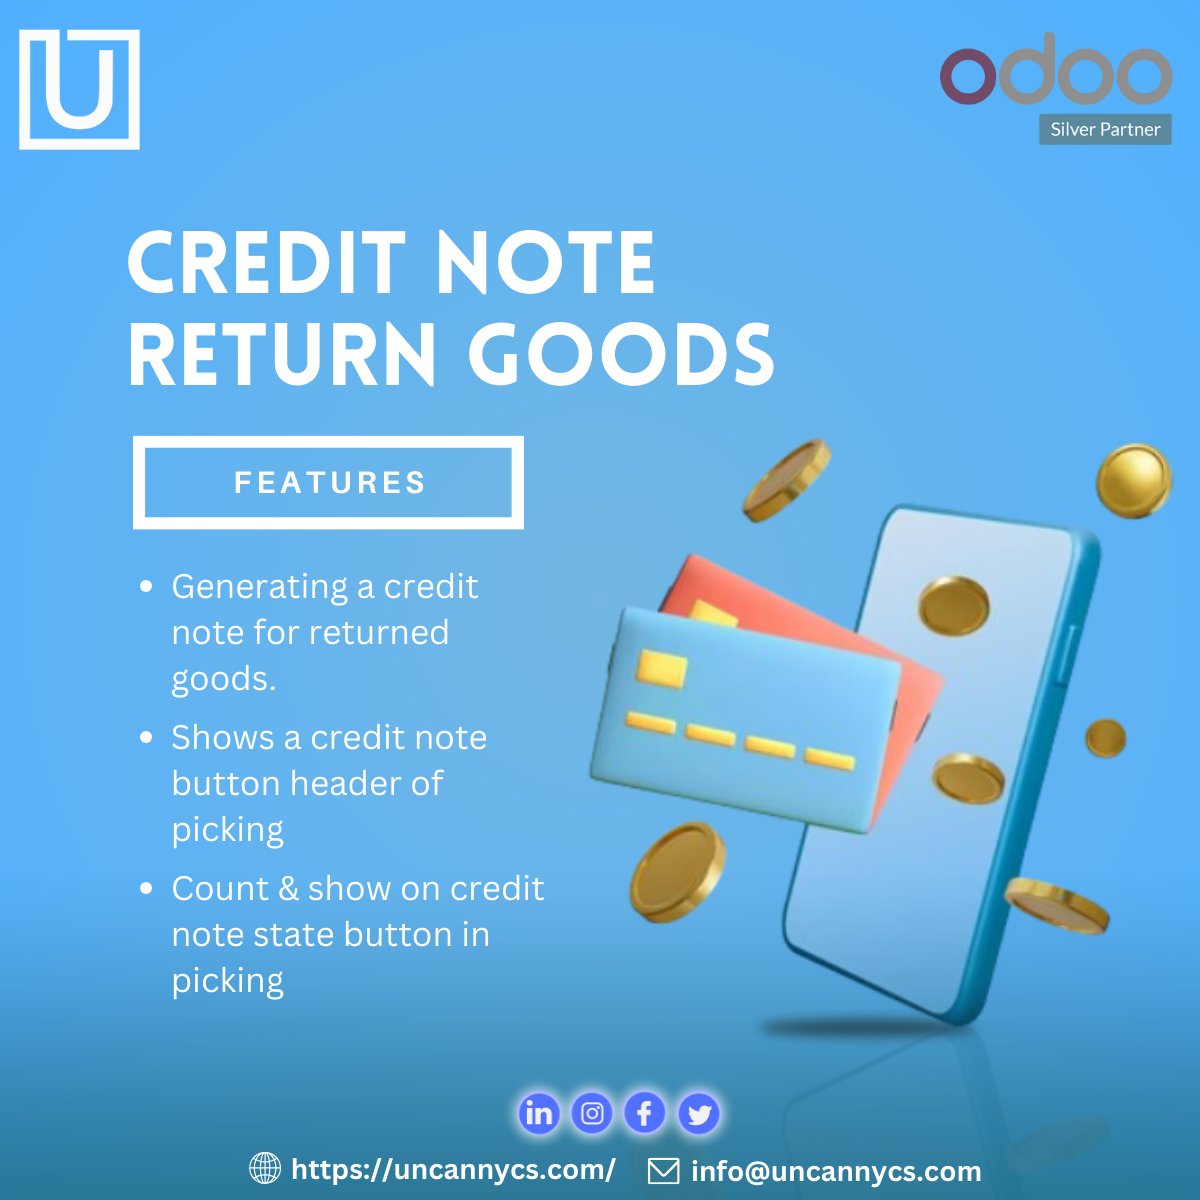 Can we have your attention, please!

Introducing our latest module, Credit Note Return Goods.

apps.odoo.com/apps/modules/1…

#Uncannycs #CreditNotes #returngoods #creditmanagement #inventorysoftware #ERP #businessautomation #effortlessreturns #SeamlessOperations #timesavingtips